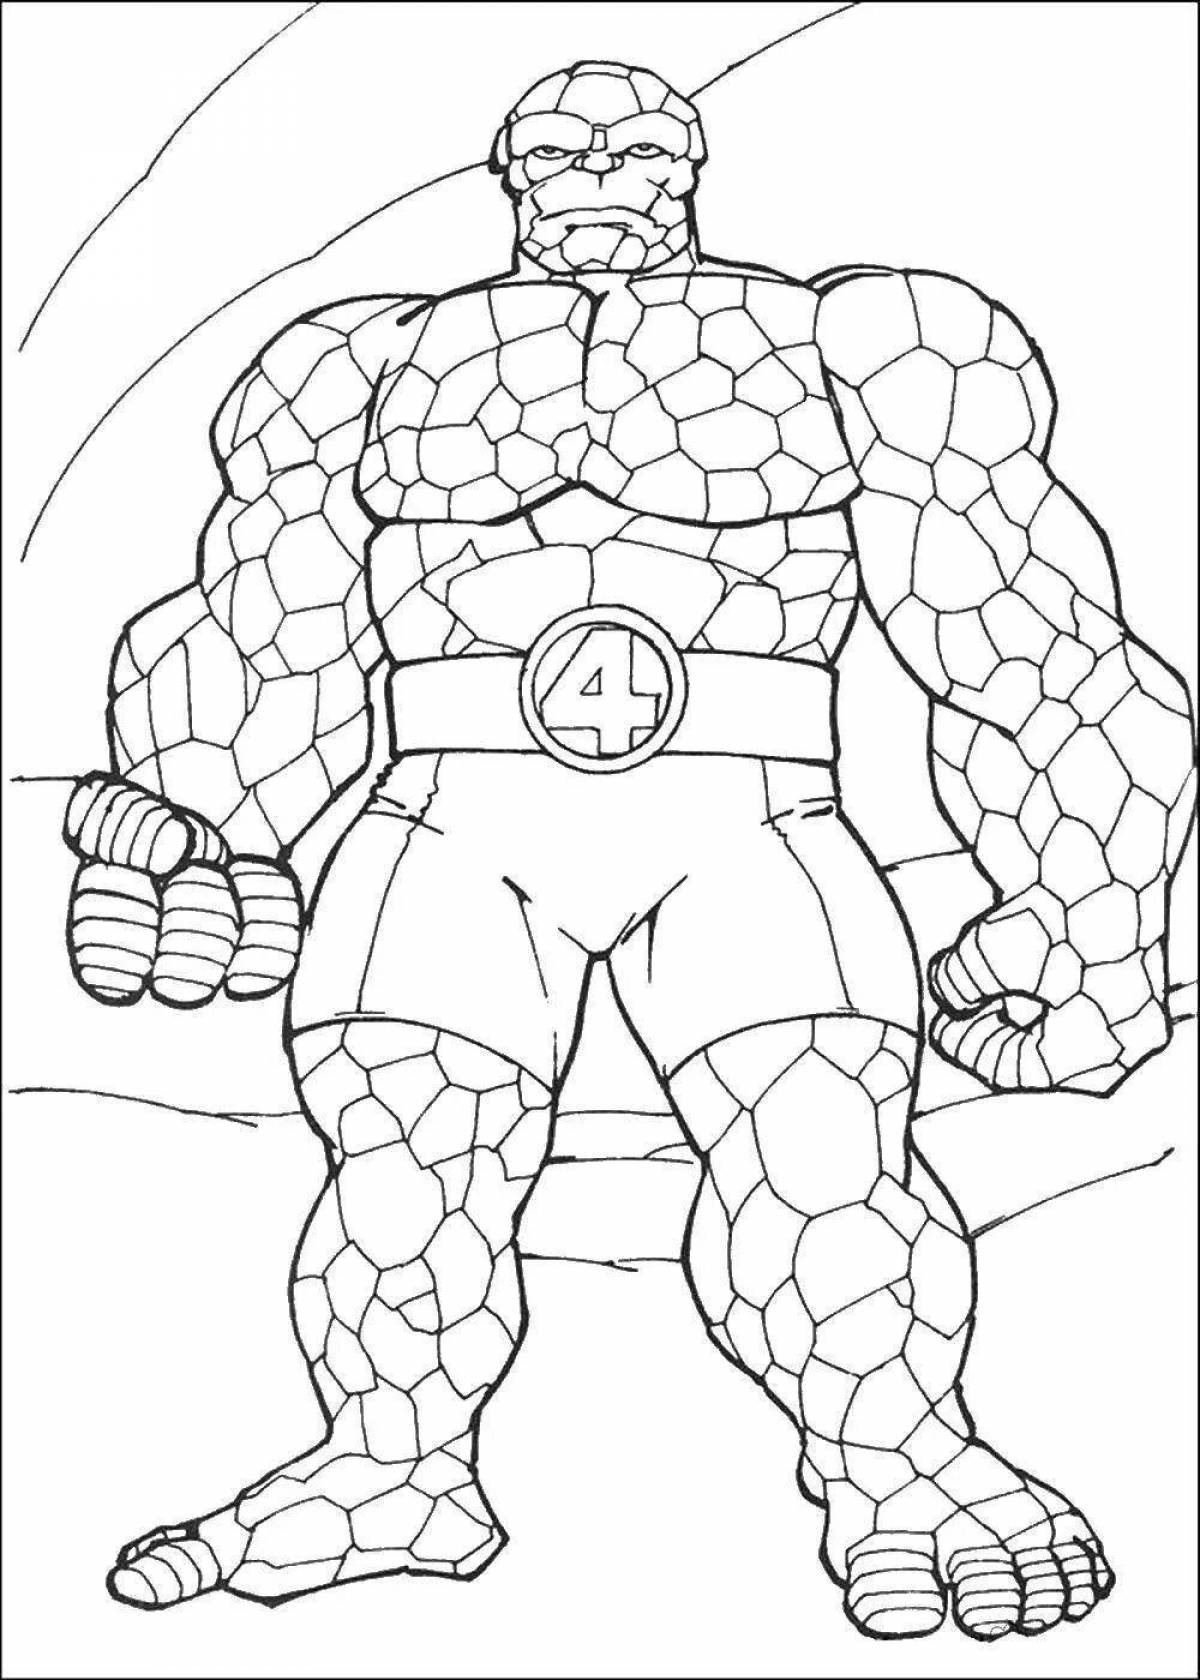 Exciting superhero coloring pages for 5-6 year olds